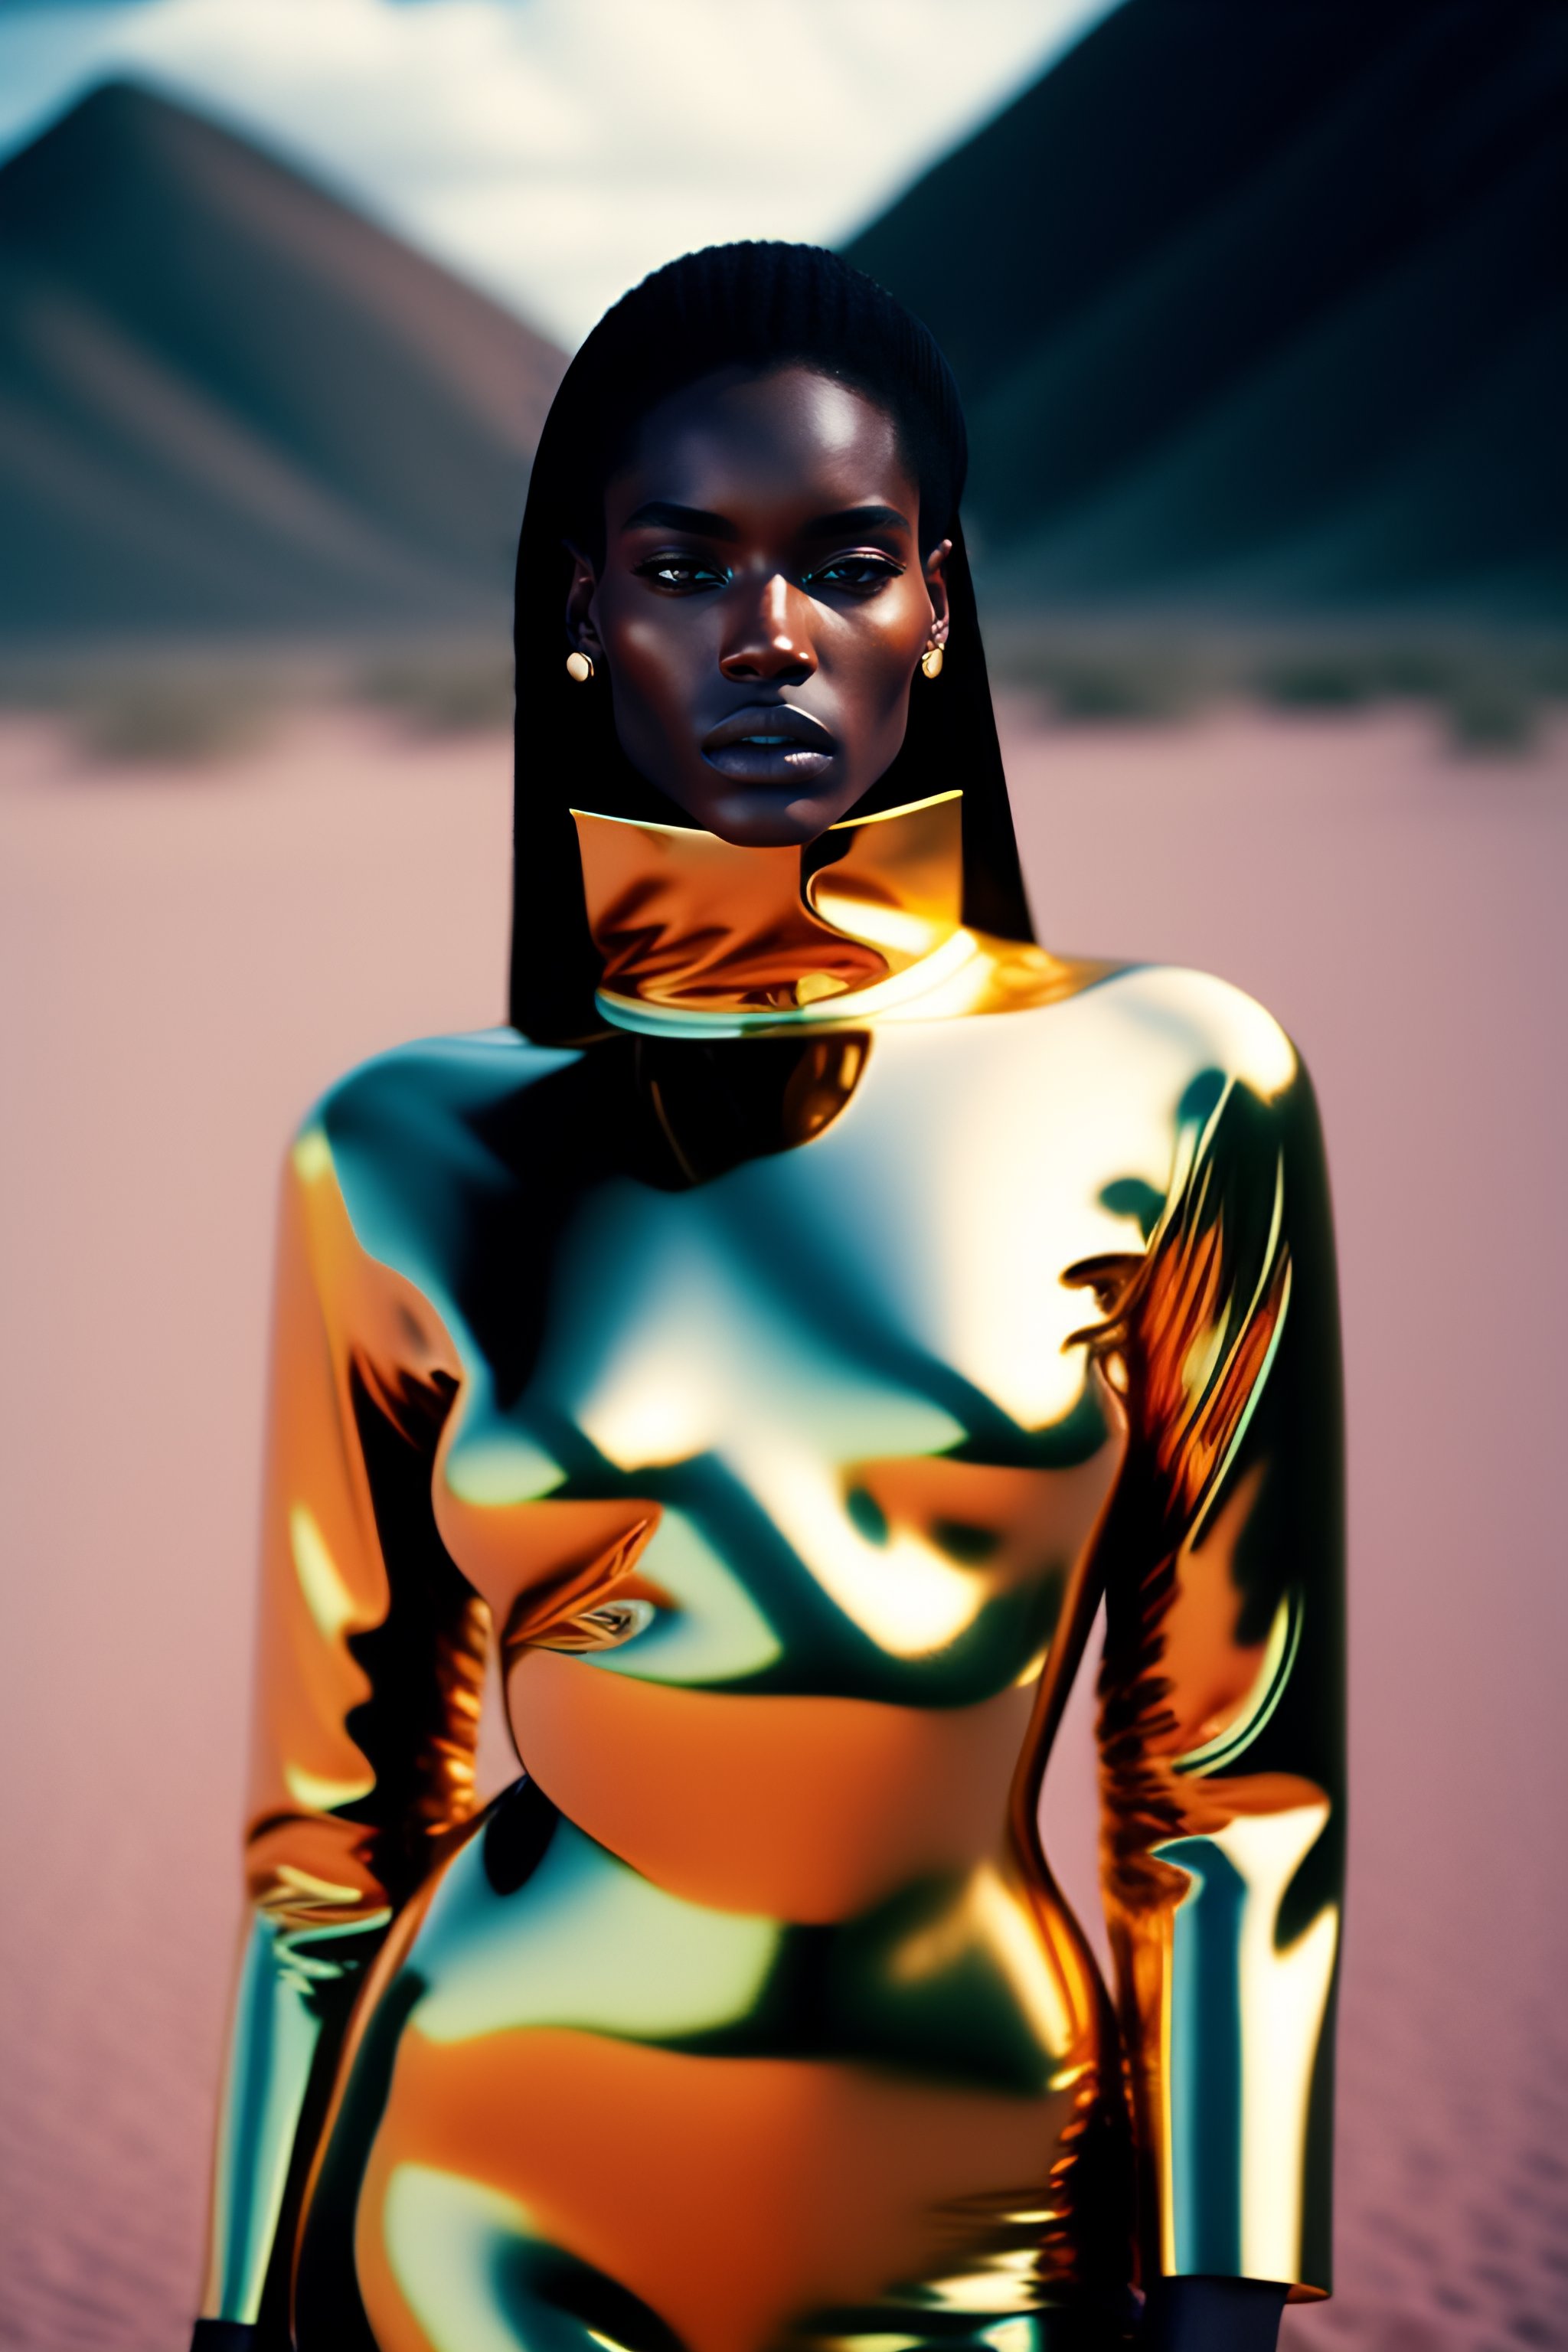 Lexica - a woman wearing a futuristic outfit